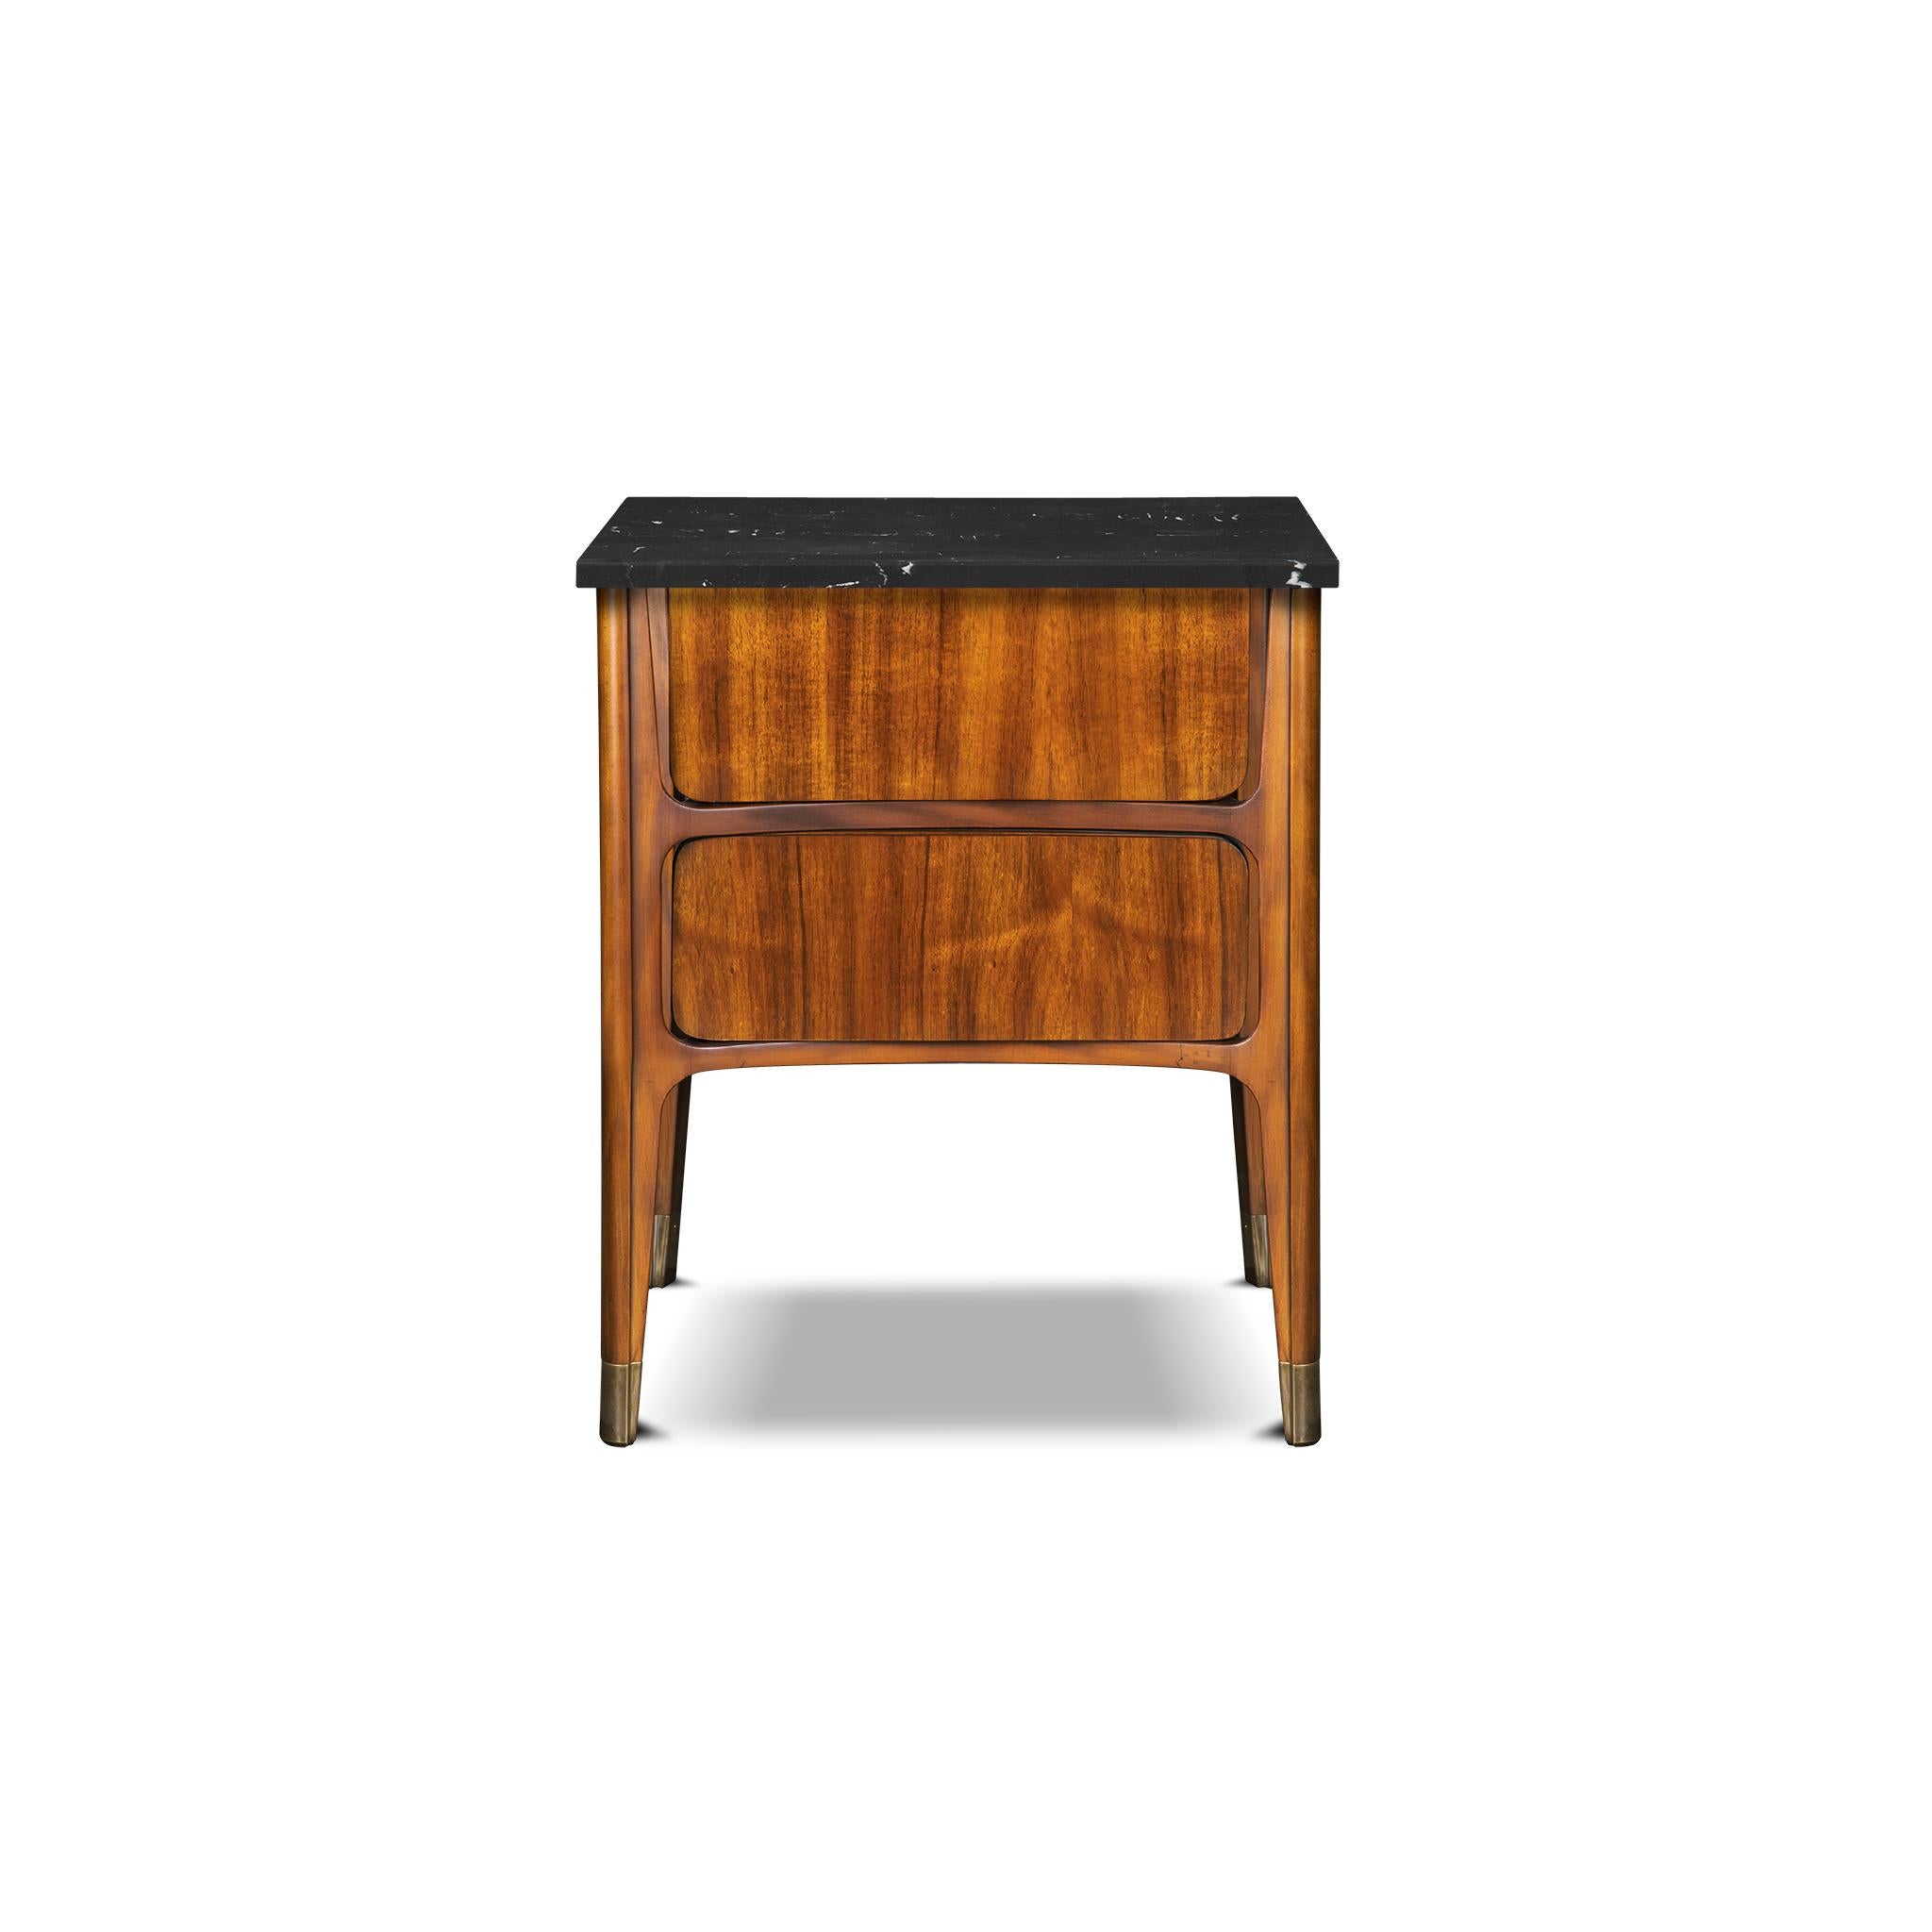 This Kassel Small Chest is as versatile as it is unique. Veneered in koa wood with a marble top, it works perfect as a nightstand or as a side table. The drawers are curved inwards creating an interesting visual effect and has tapered legs that are